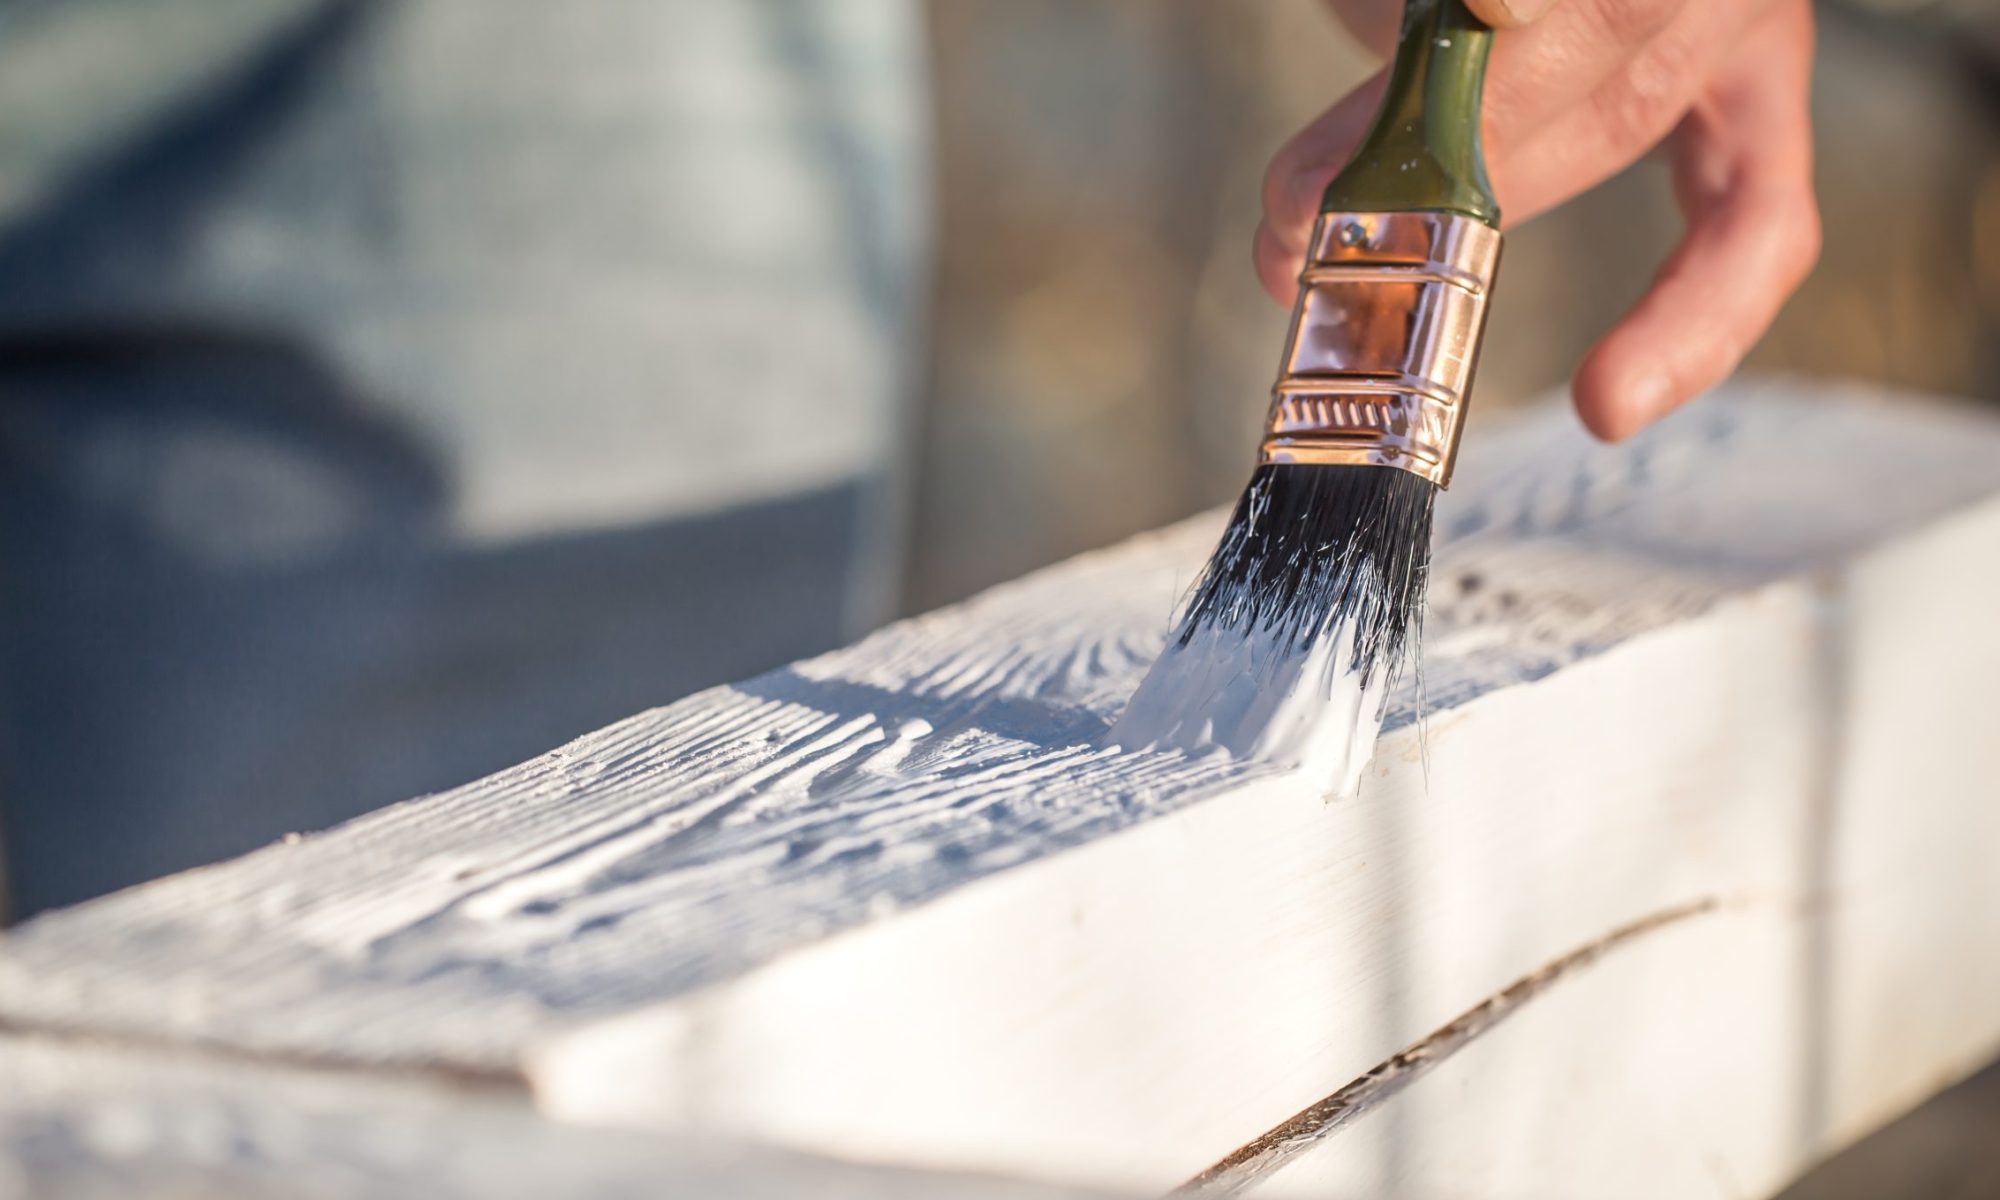 A male hand paints a plank of wood white - painting is a cheap renovation option to increase the value of an investment property